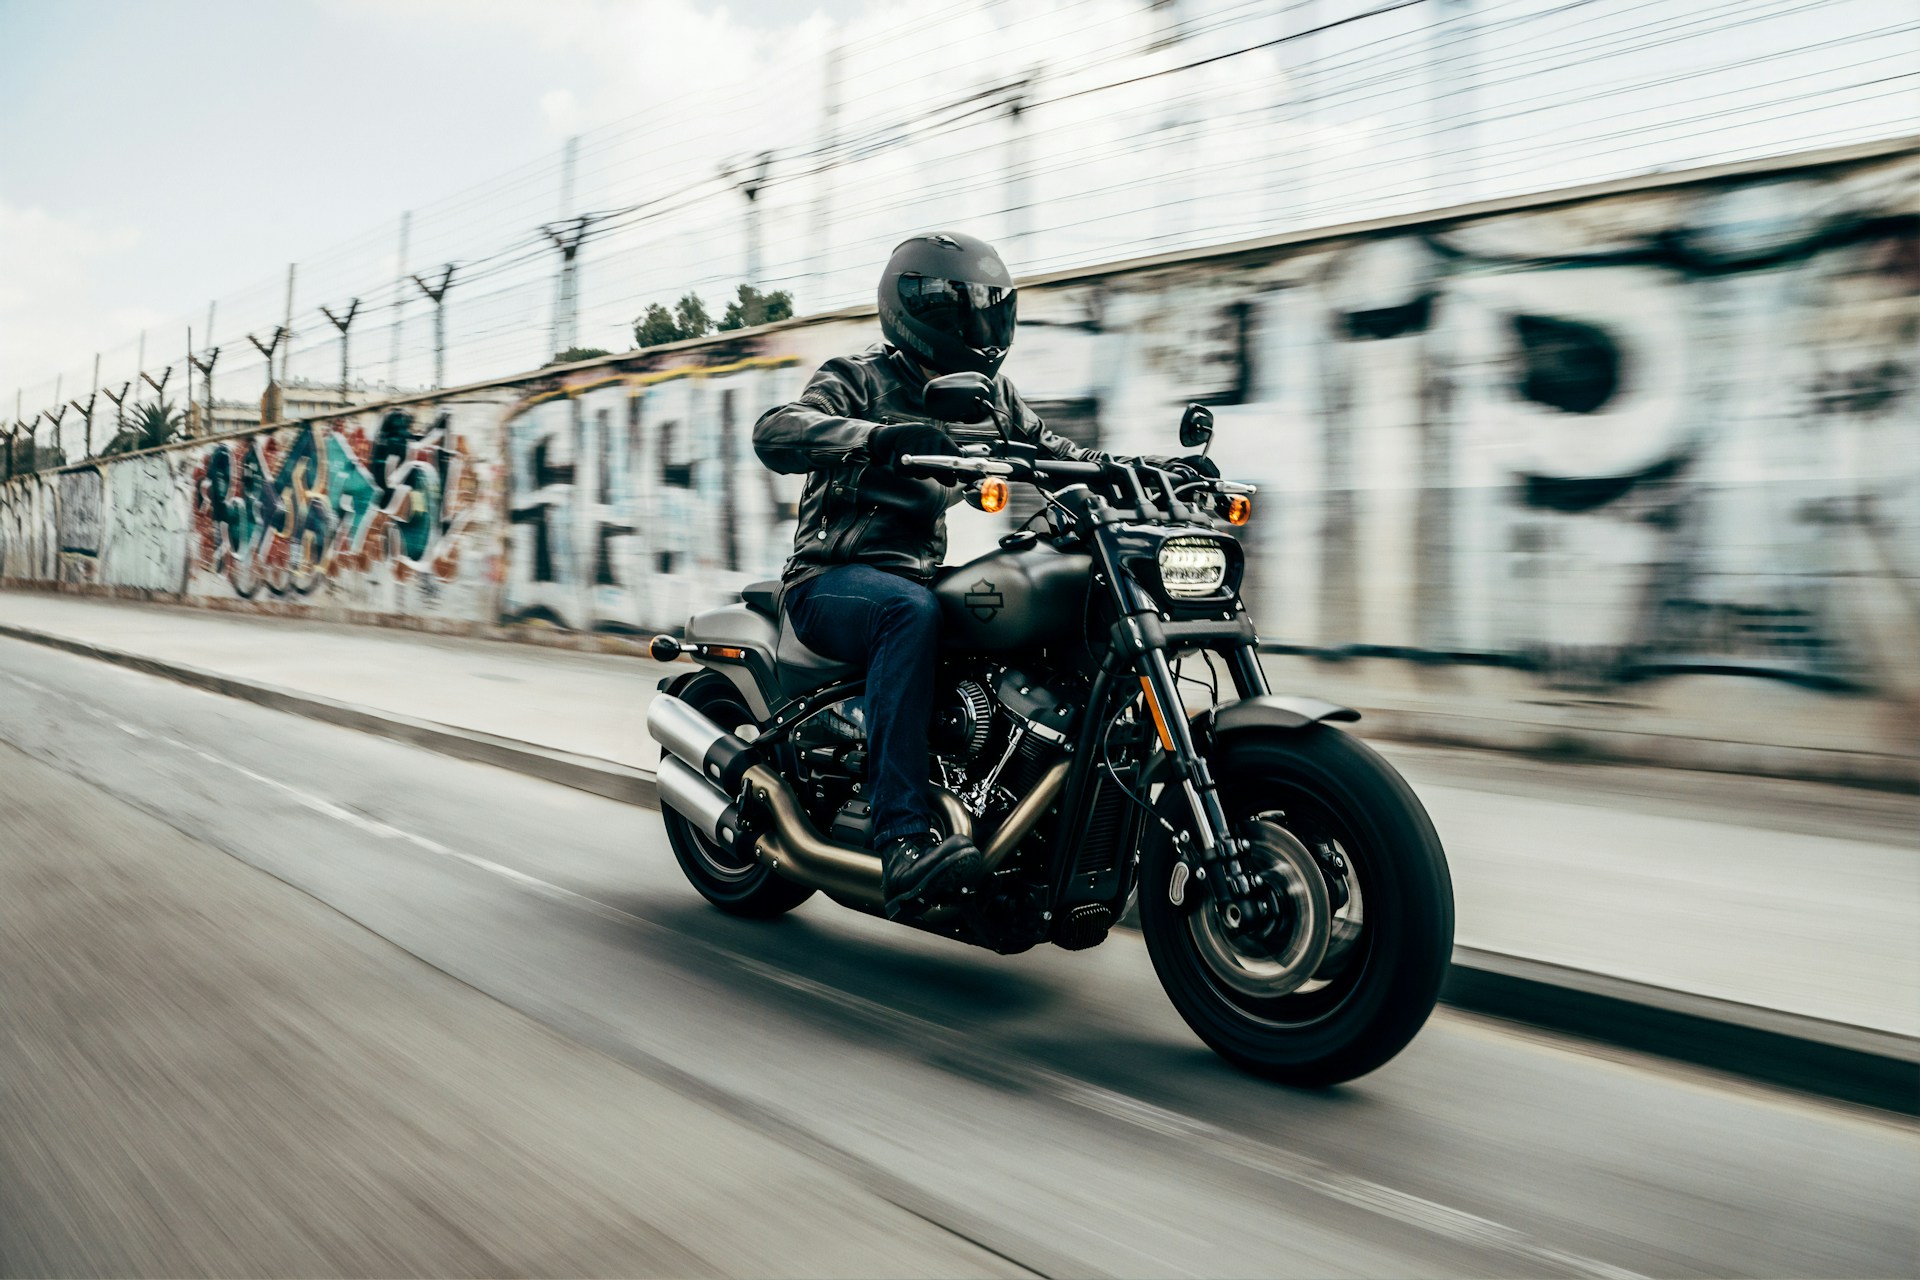 Motorcycle Safety Tips to Prevent Accidents and Injuries on Orlando Roads